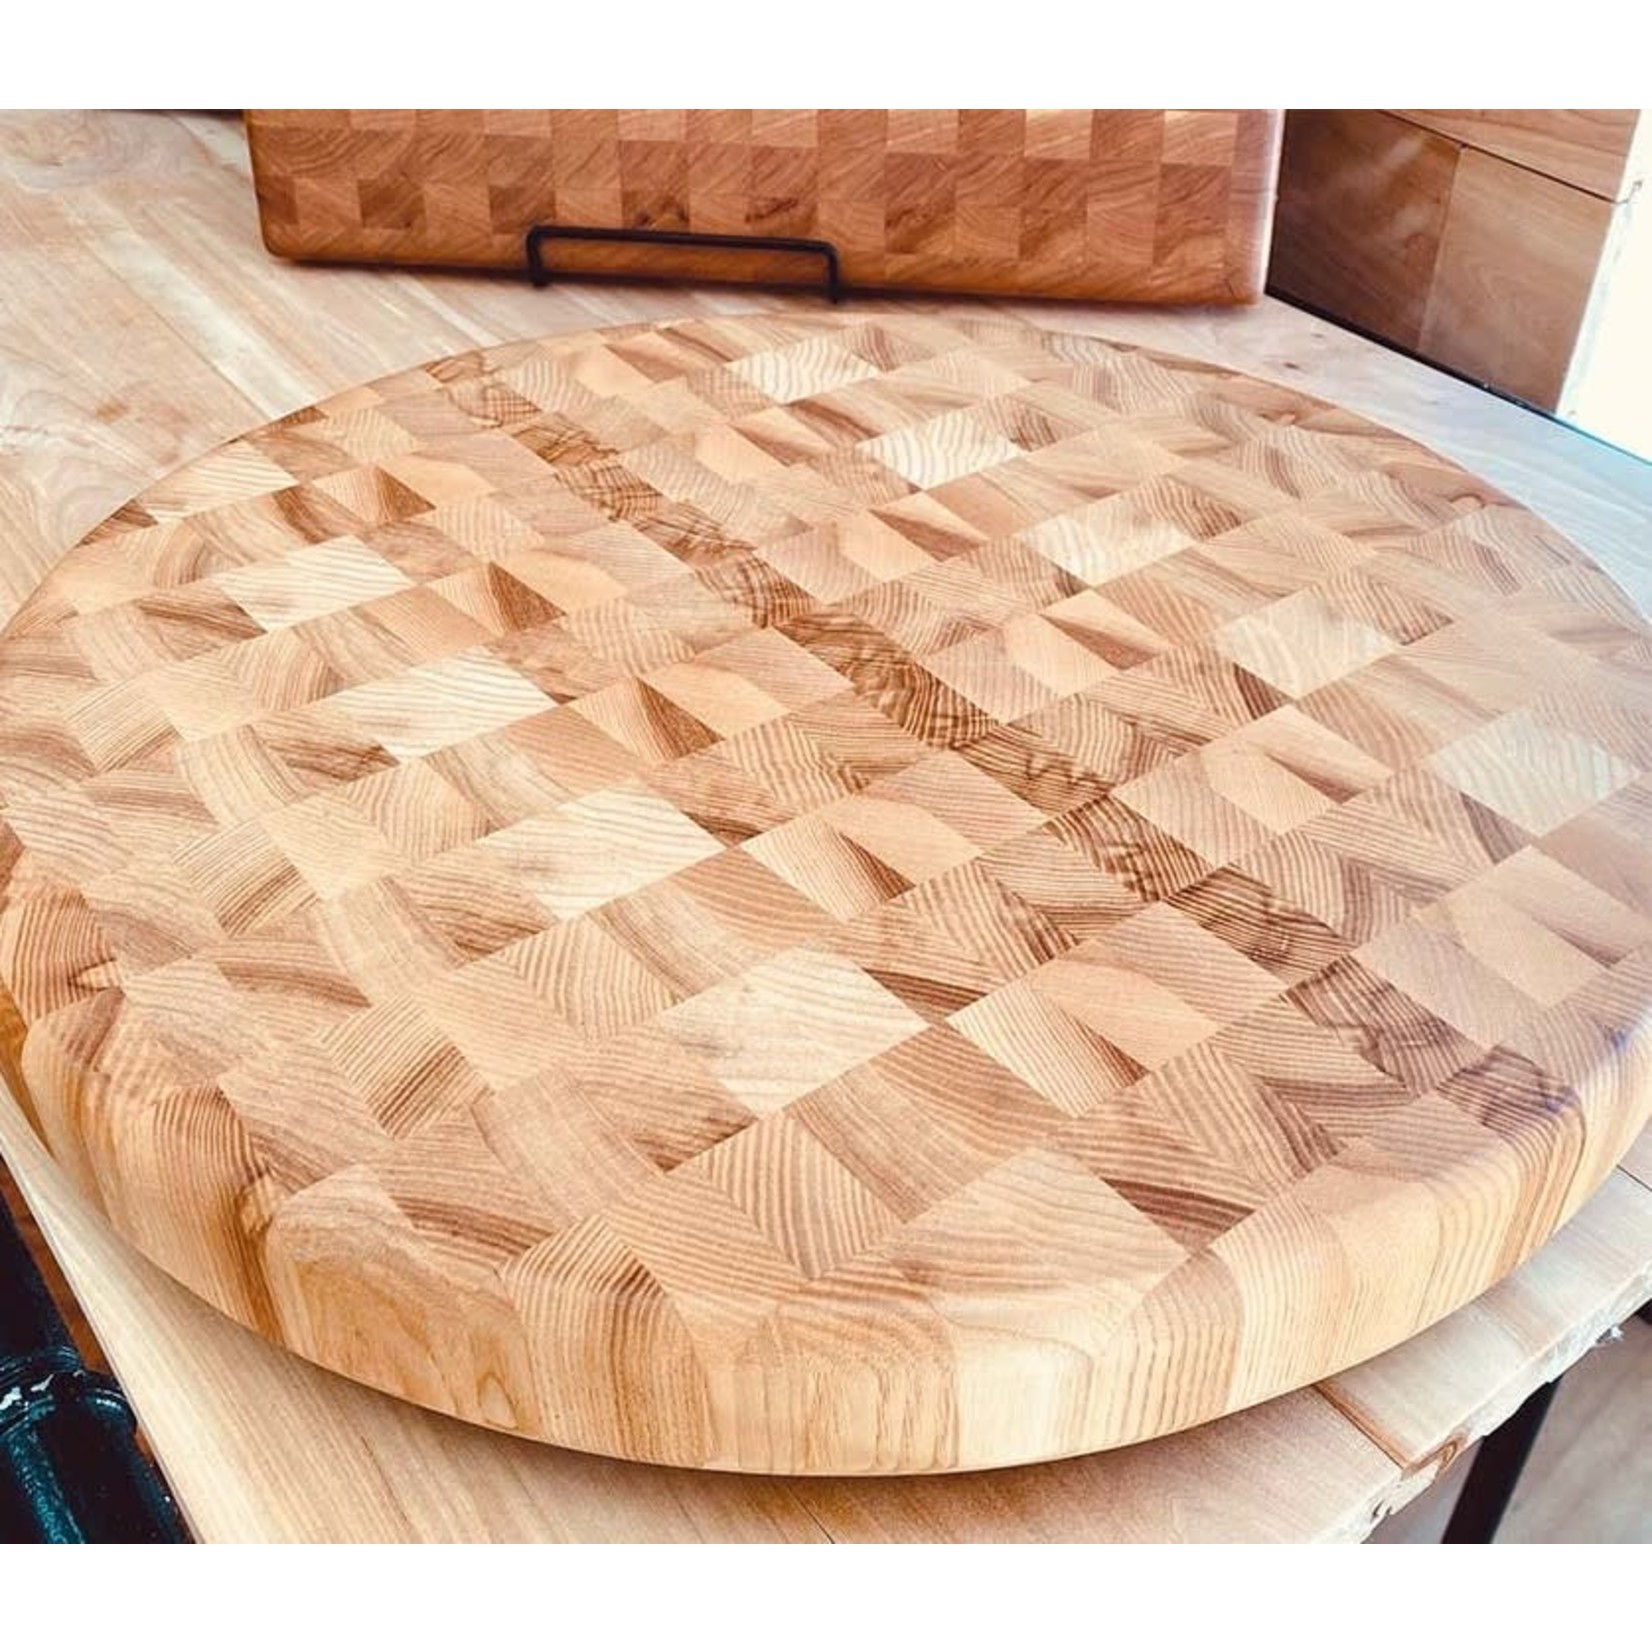 GUM CREEK BOARDS  END GRAIN CUTTING BOARDS – Lawrence's Gift